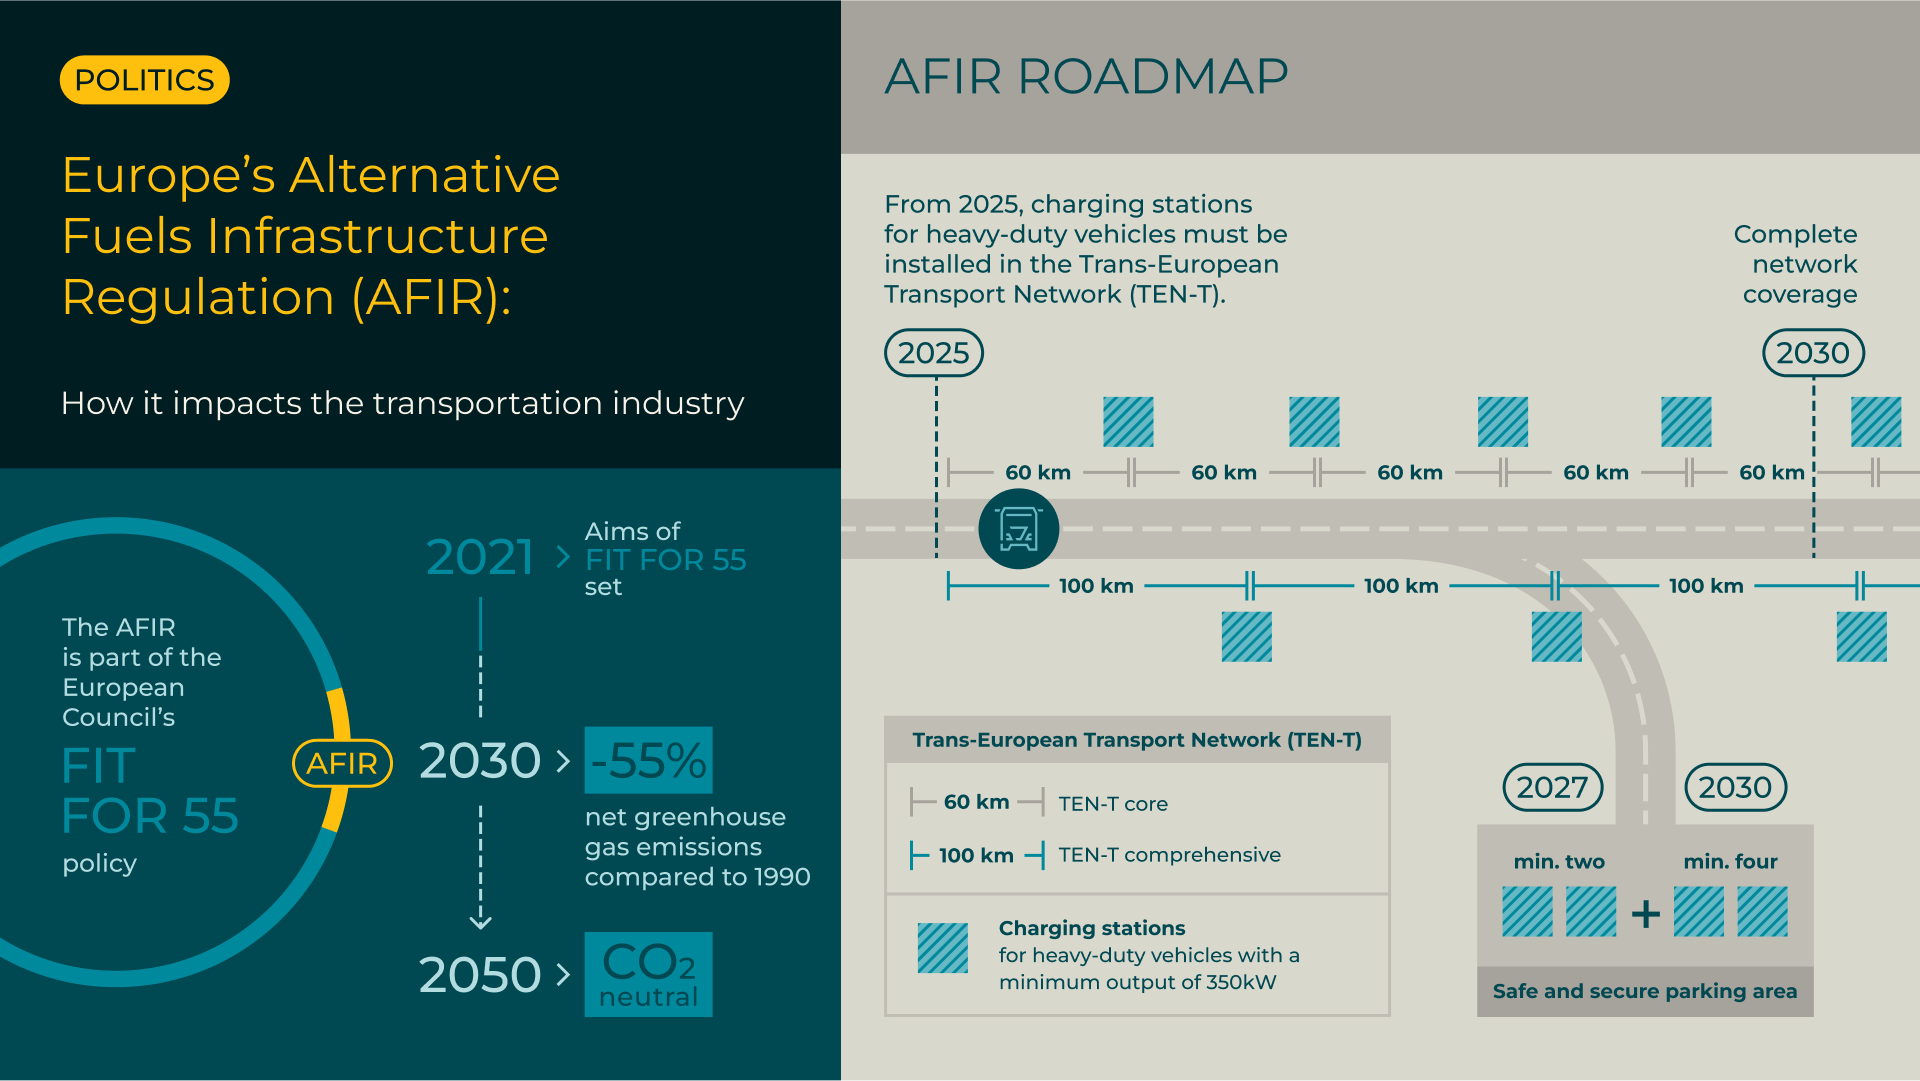 How the AFIR* impacts the transportation Industry